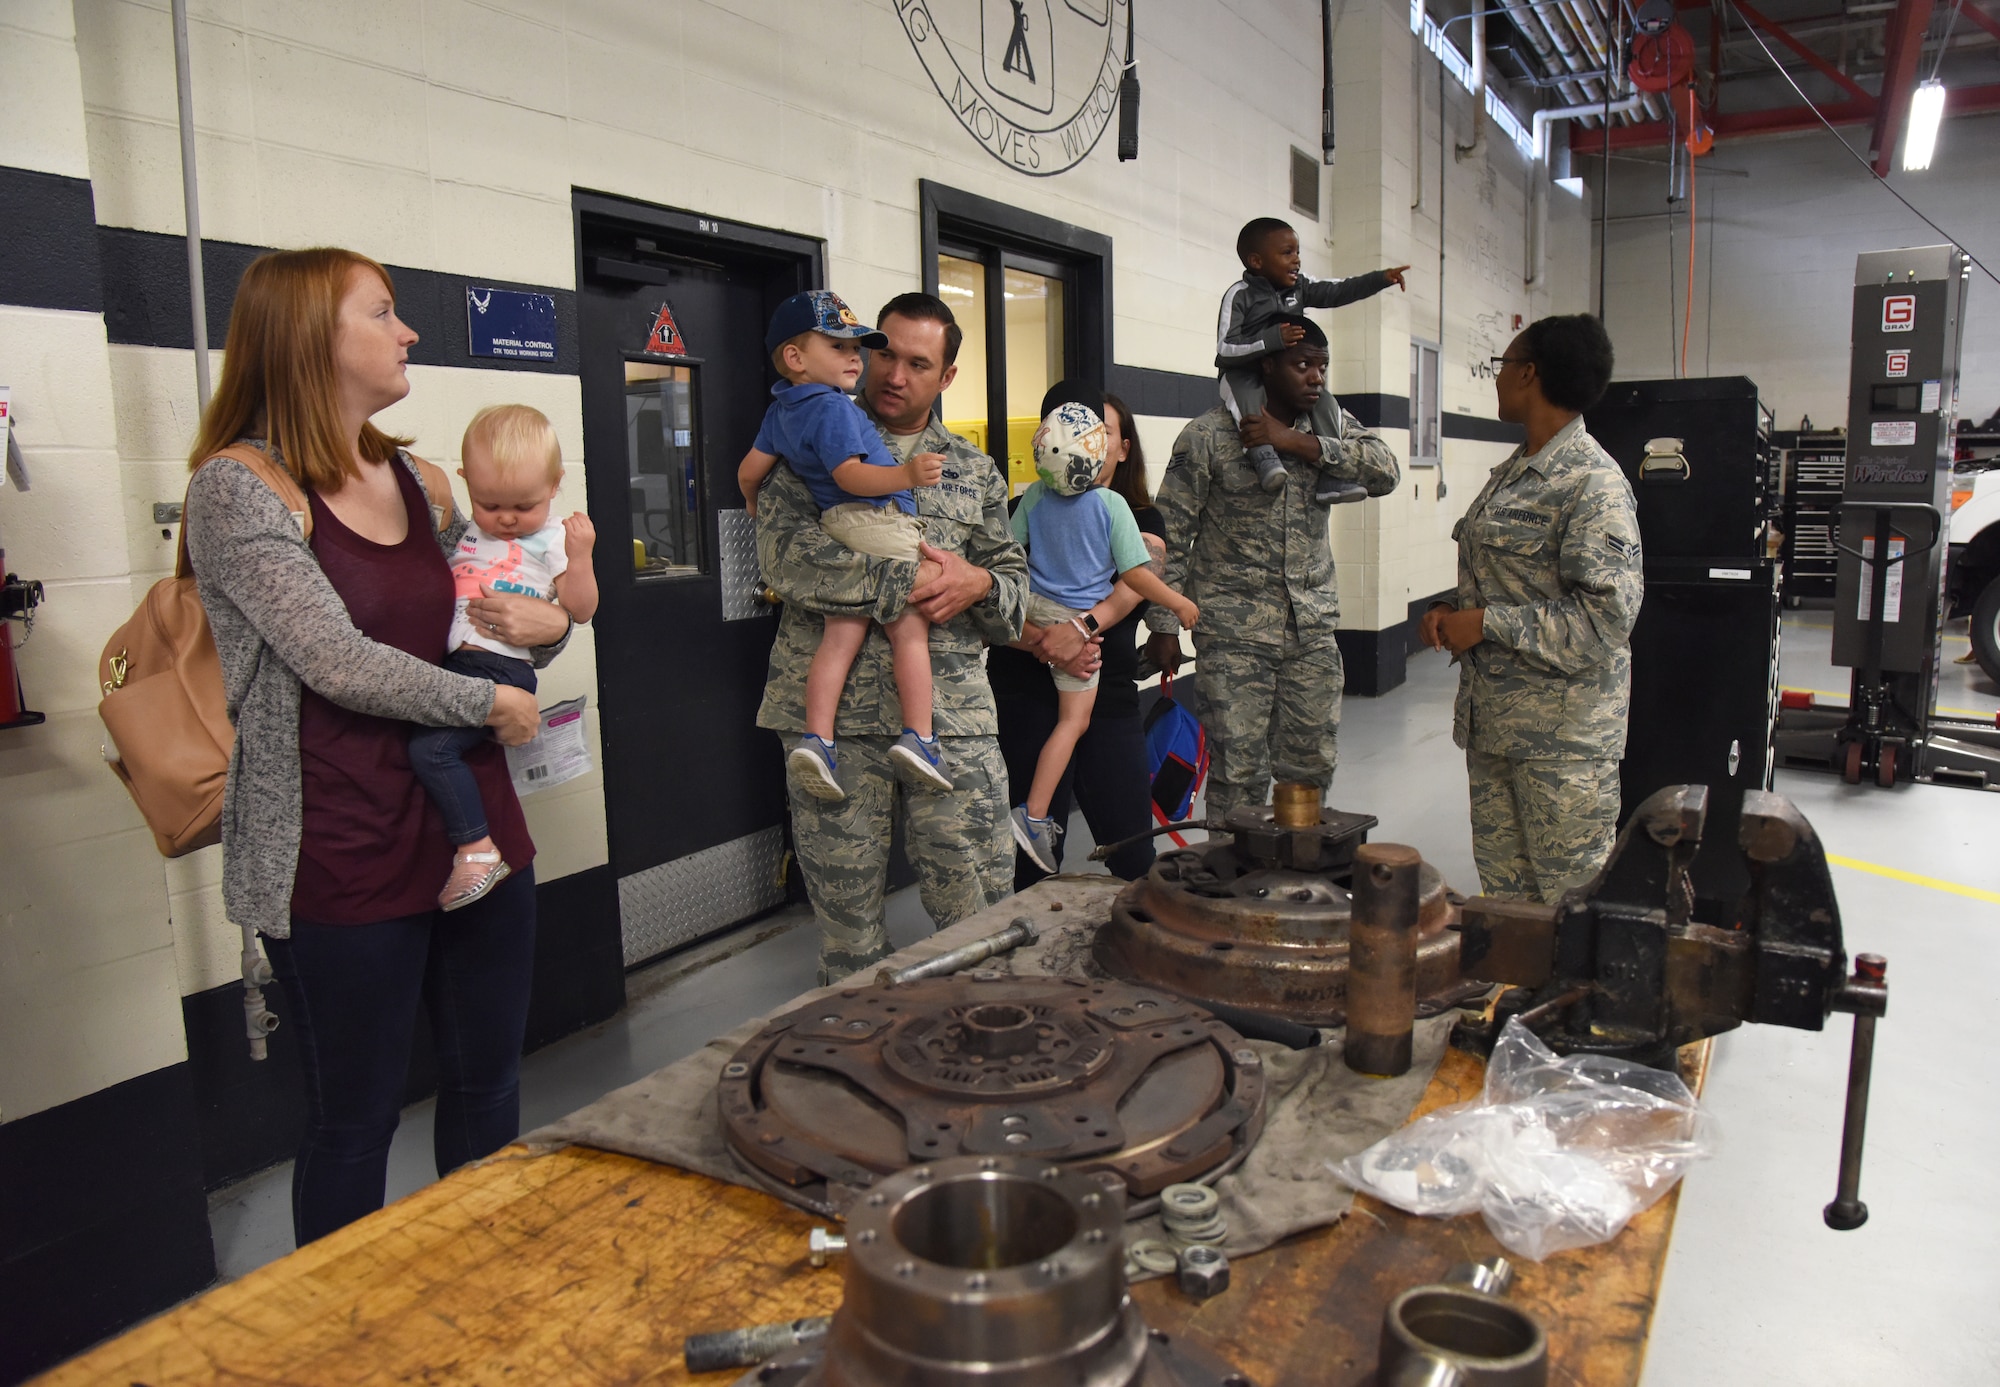 Members of the 81st Logistics Readiness Squadron take their children on a tour of the vehicle maintenance building during the 81st LRS Bring Your Child to Work Day event at Keesler Air Force Base, Mississippi, April 26, 2018. The event allowed children the opportunity to experience what their parents do at work by touring facilities while receiving hands-on experiences. (U.S. Air Force photo by Kemberly Groue)